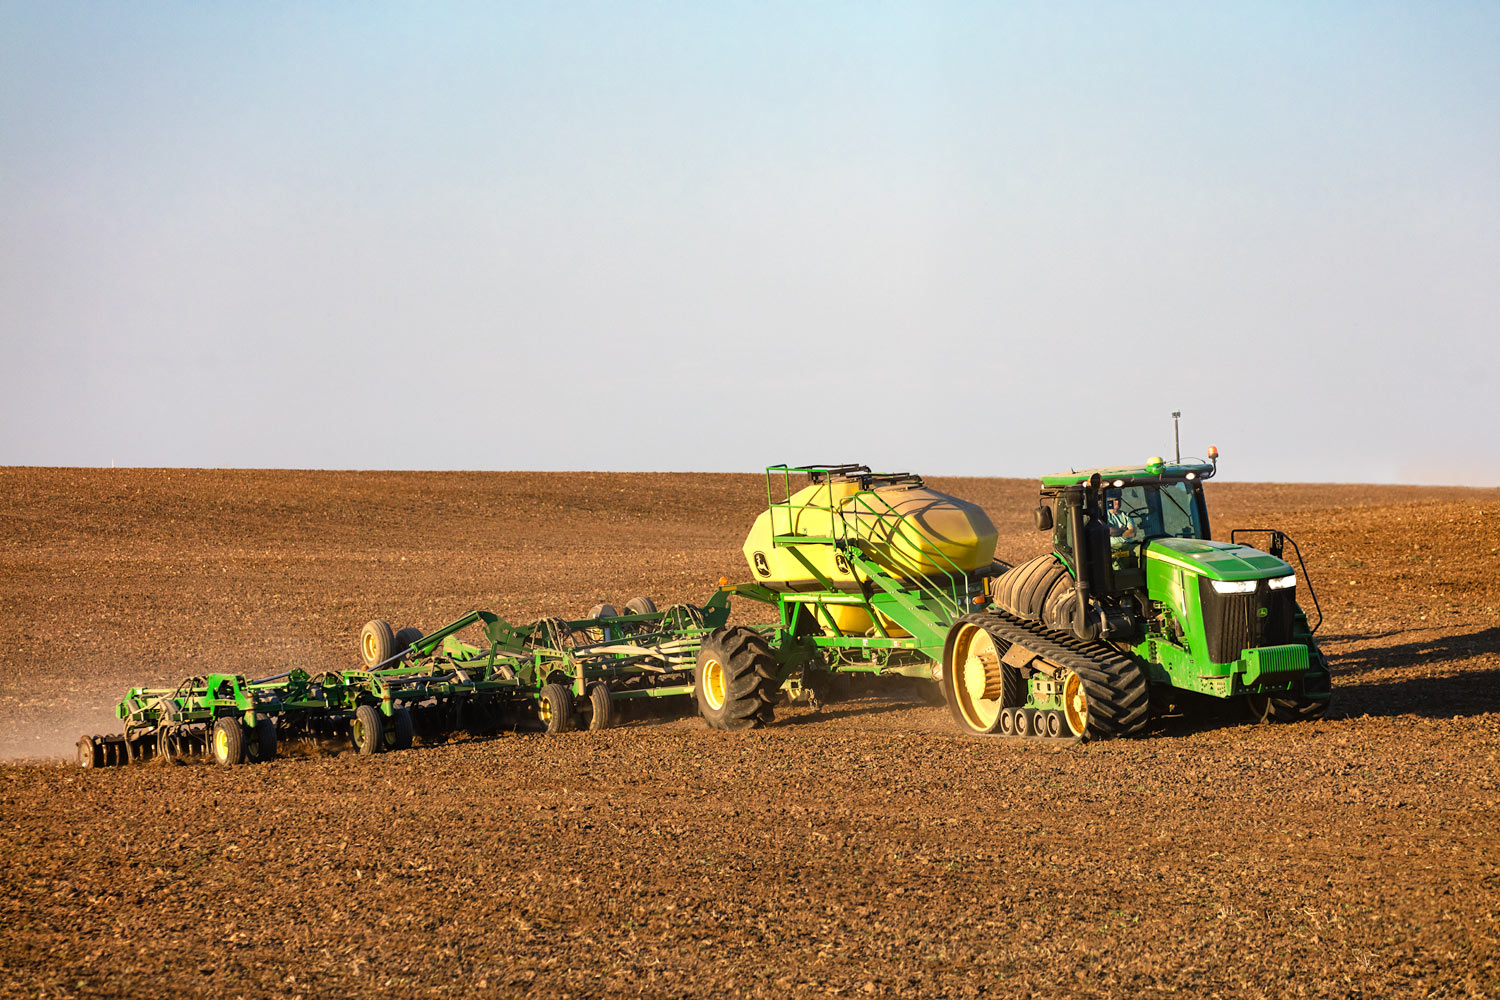 A farmer seeds wheat on an organic farm with a John Deere tractor and air drill south of Chinook, Montana.